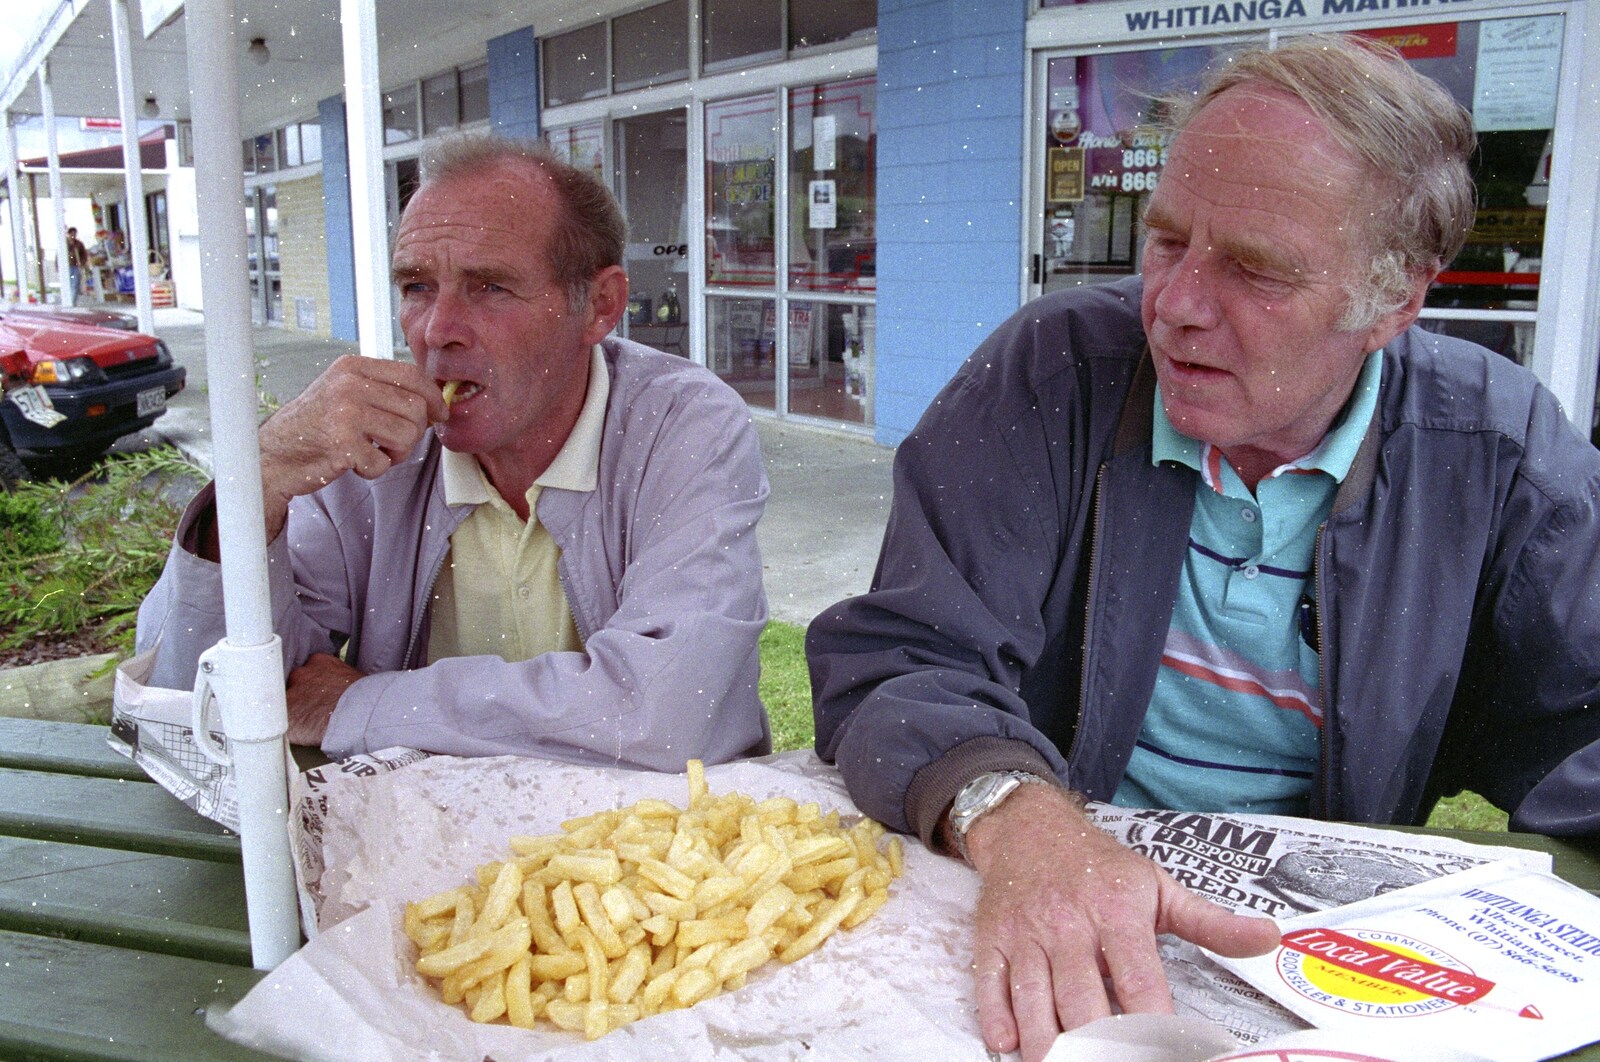 Clive and The Old Chap eat chips in Whitianga from Ferry Landing, Whitianga, New Zealand - 23rd November 1992